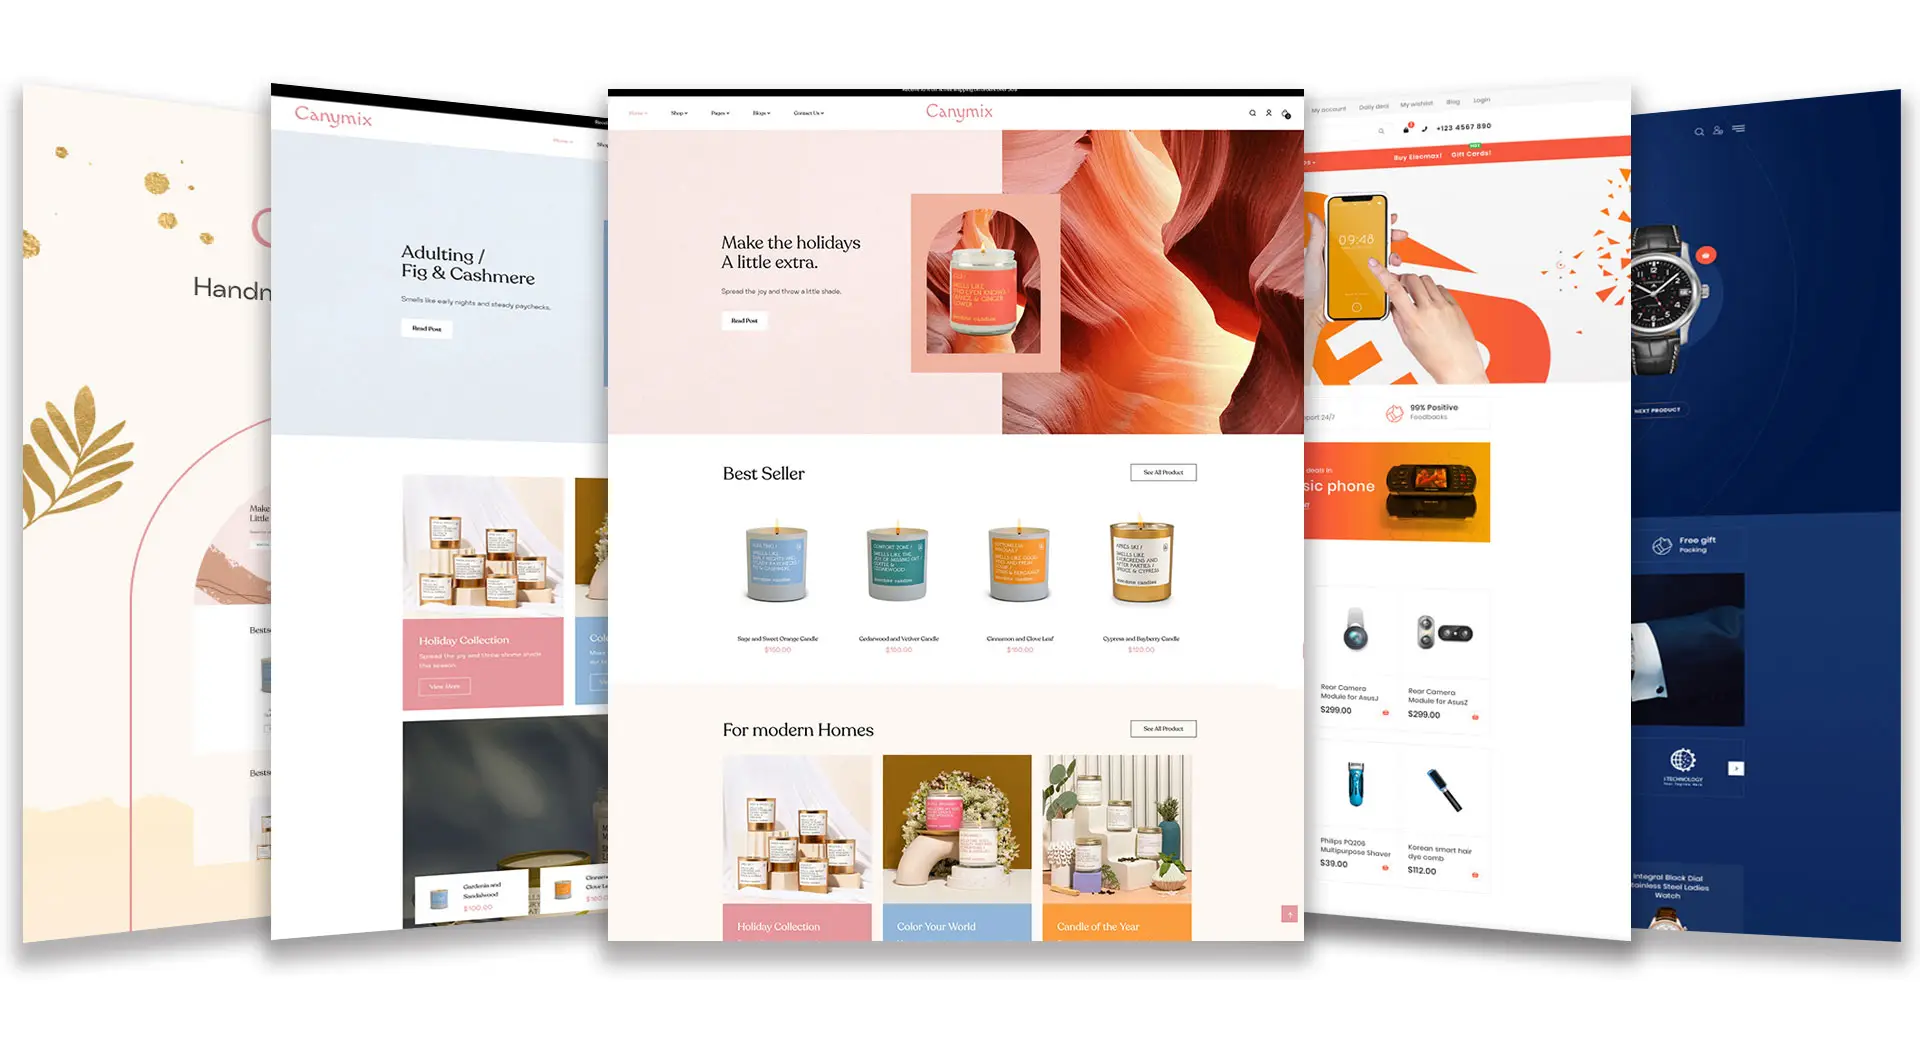 Free Shopify Themes That Impress (and How to Make Them Your Own)